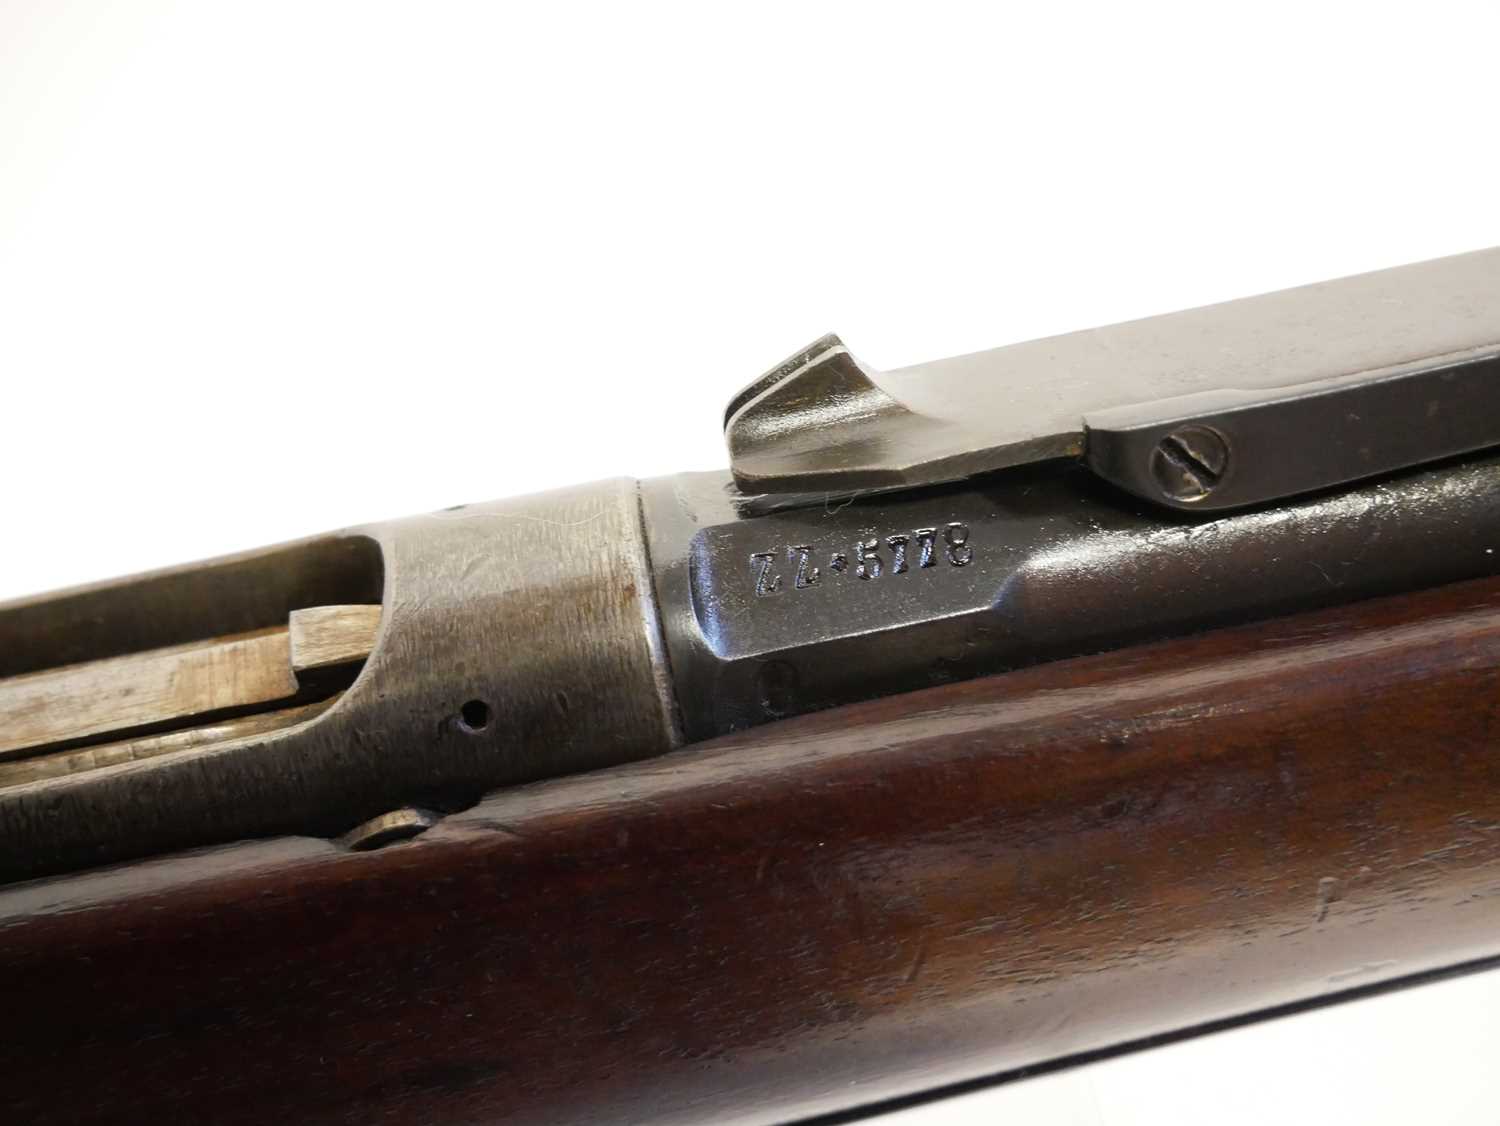 Italian Vetterli M.1870/87 10.35x47R bolt action rifle, serial number 5778, 33.5inch barrel fitted - Image 7 of 17